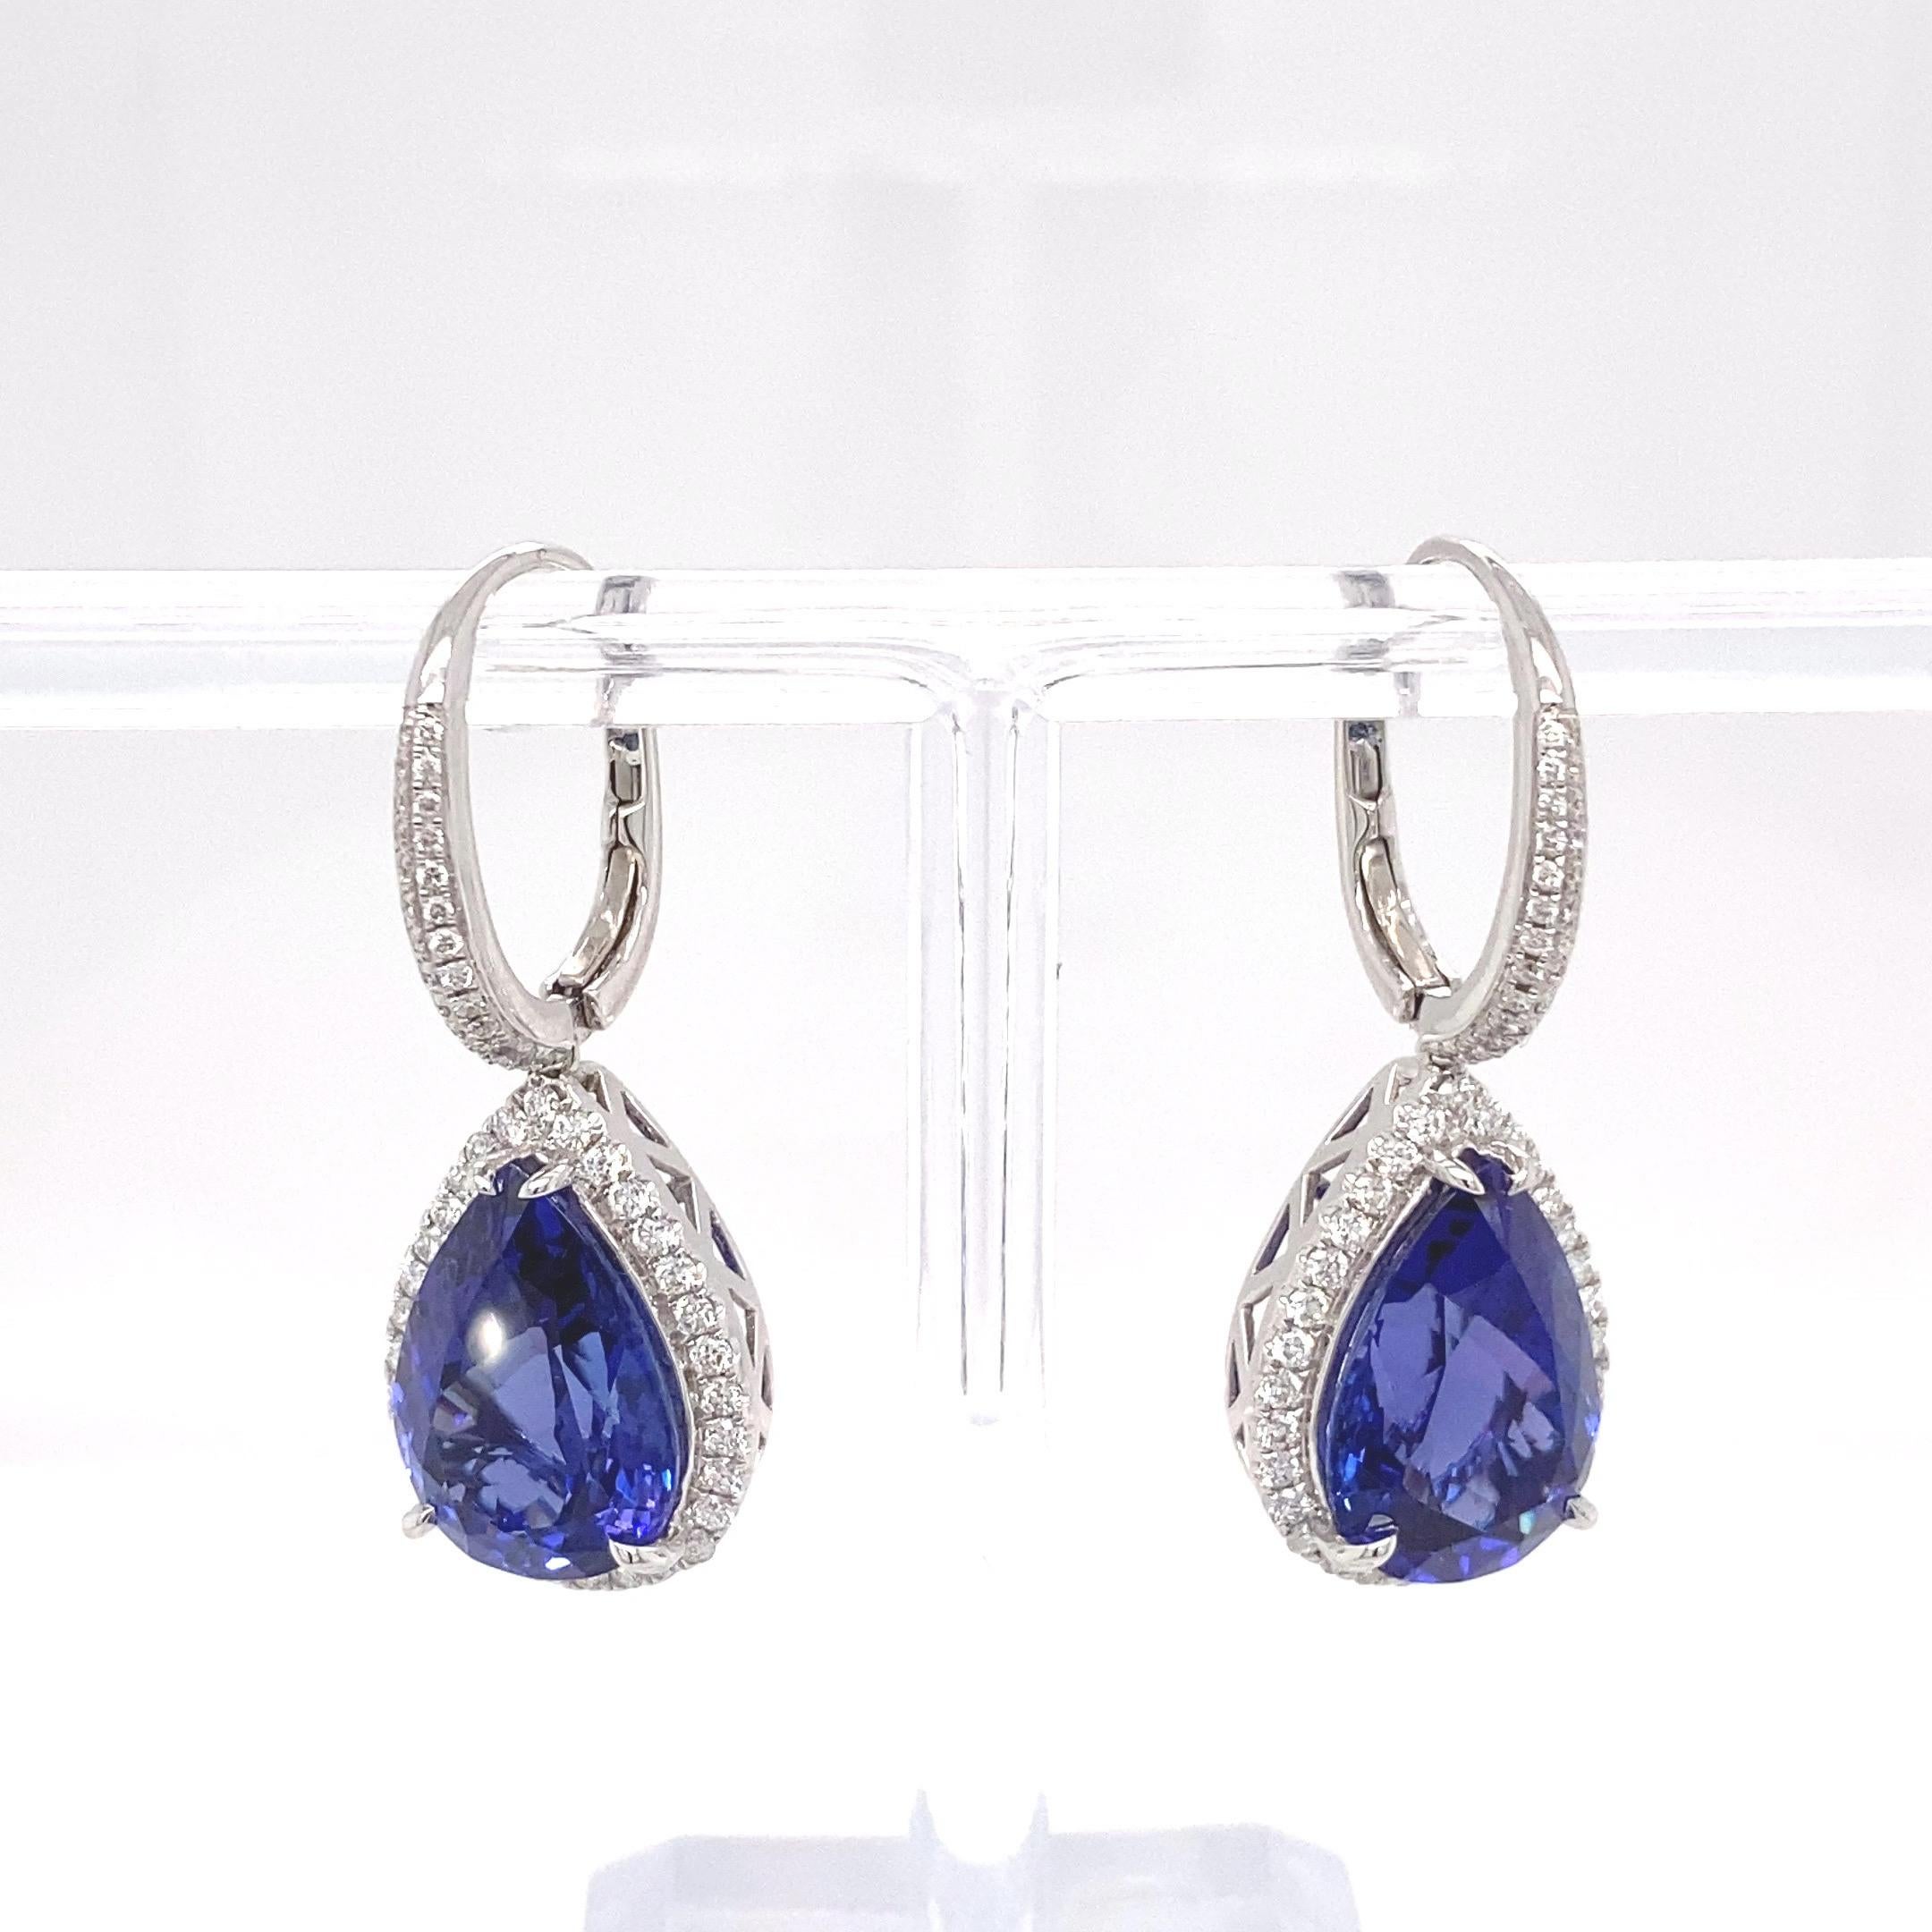 This elegant earrings has 16.51 carat pear  shape tanzanite which is surrounded by a halo of white diamonds and also has accents of diamond on the bell. The vivid violet color tanzanite is carefully crafted with detail workmanship by highly skilled